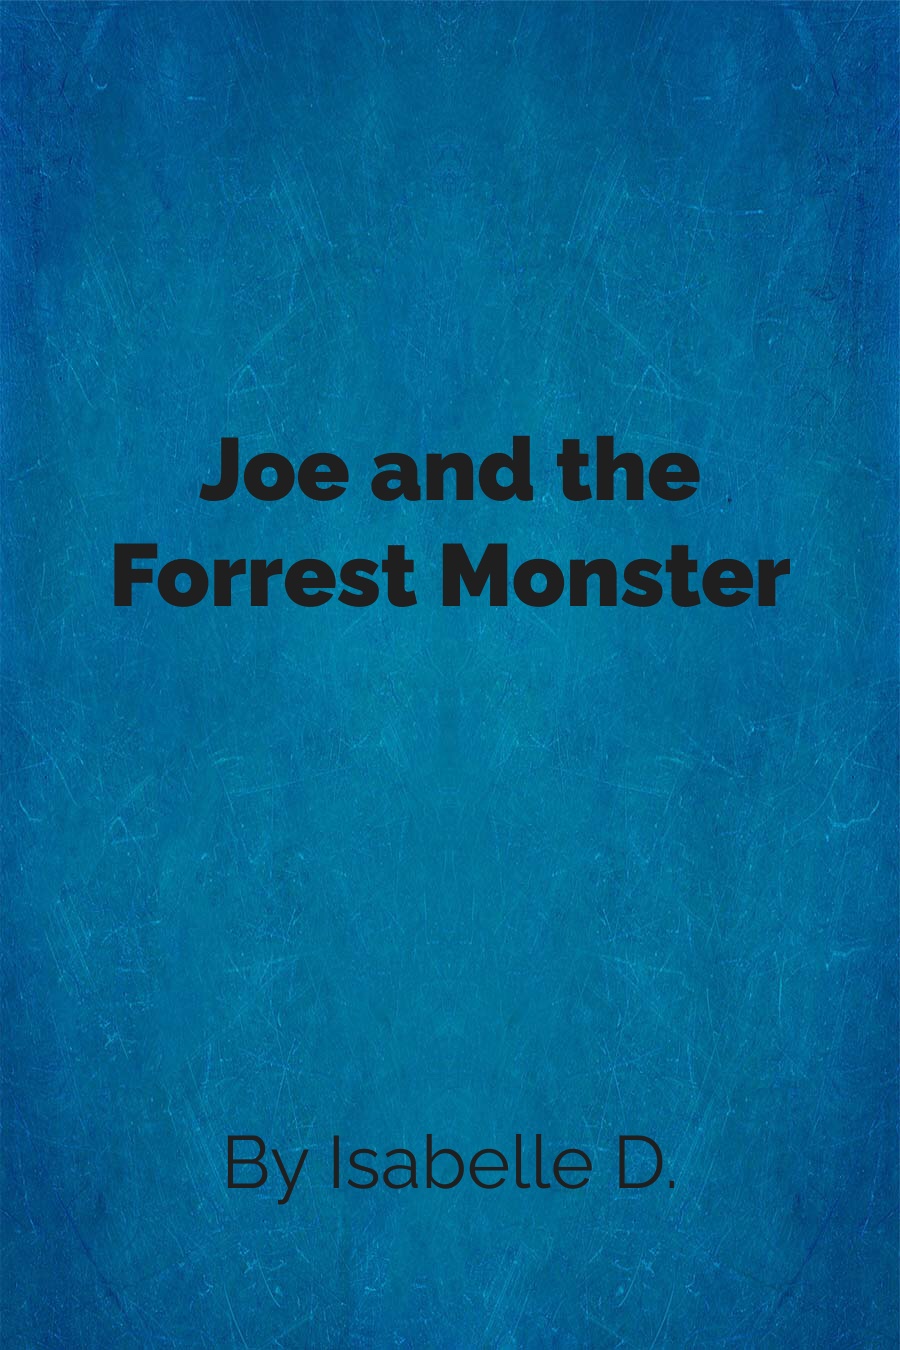 Joe and The Forrest Monster by Isabelle D